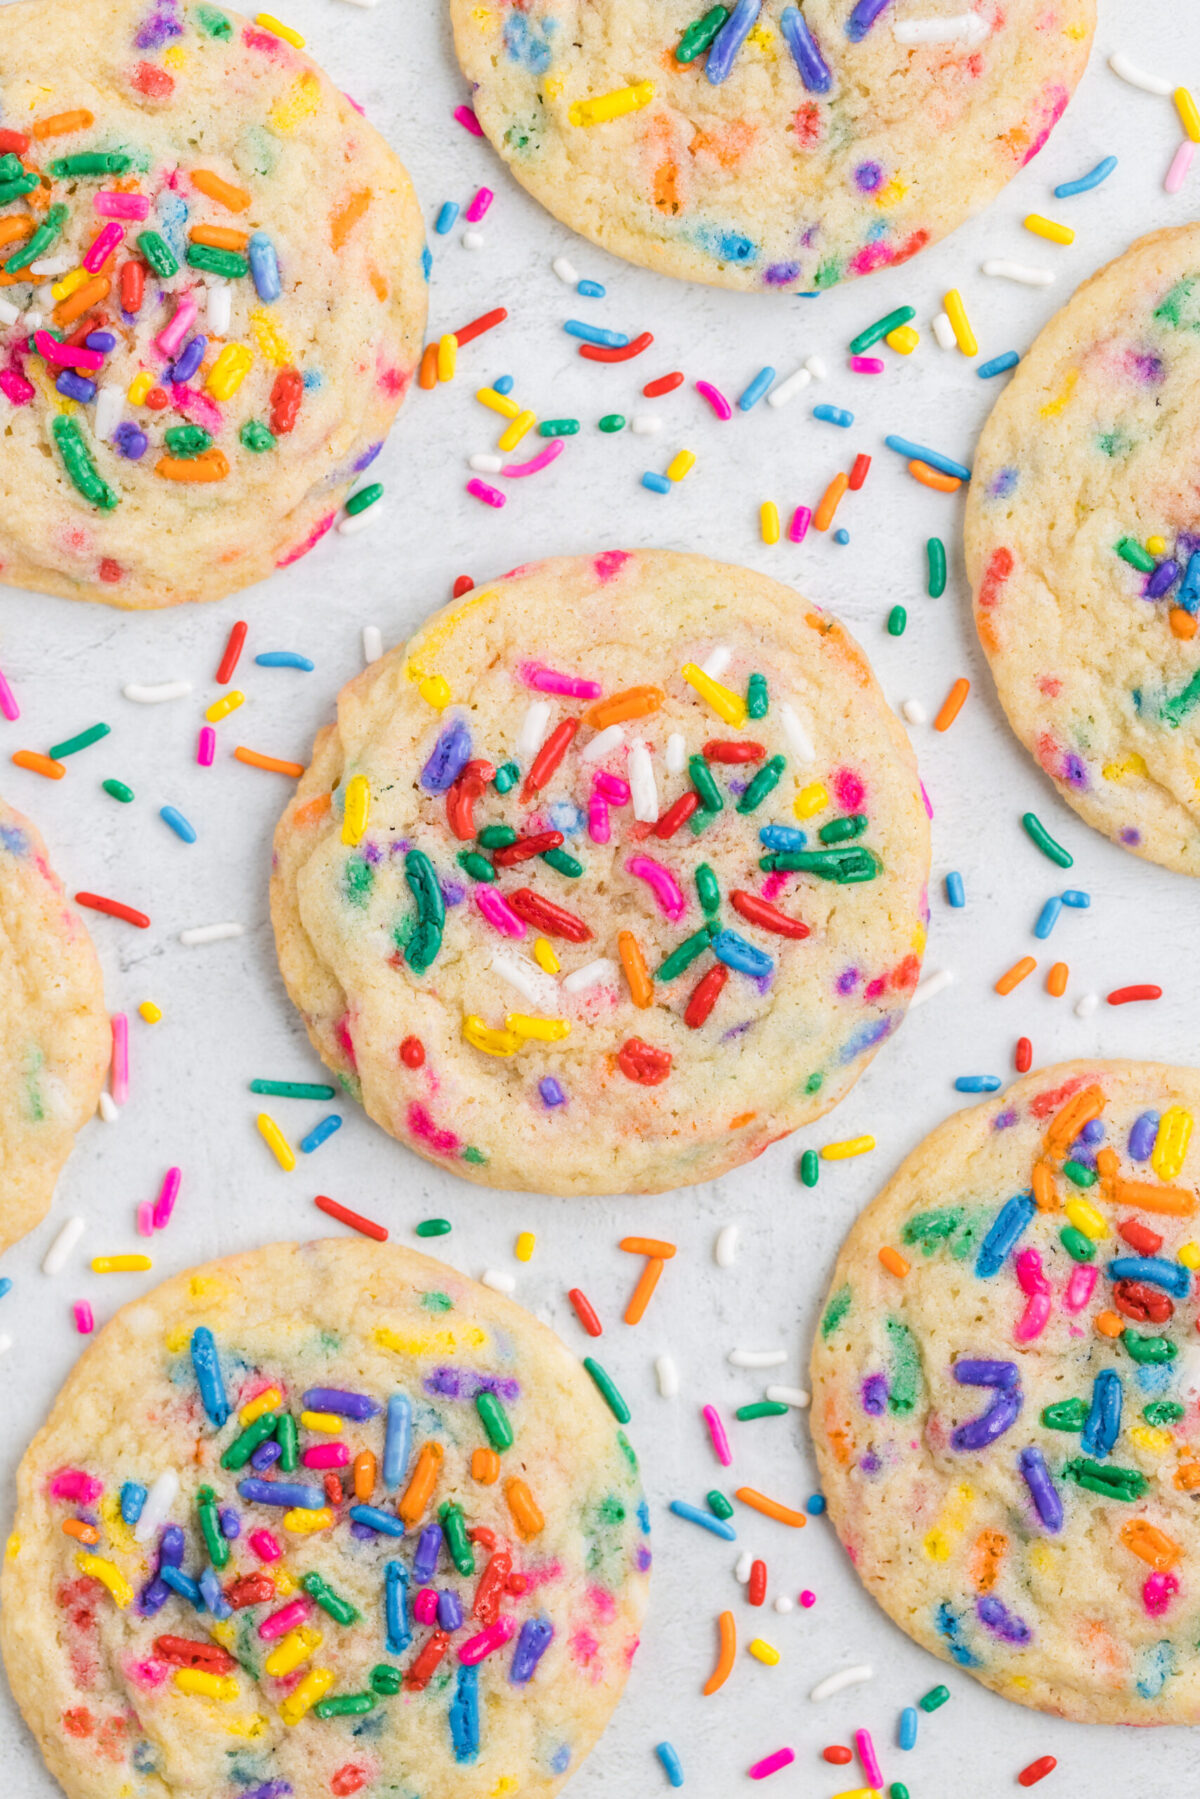 7 cookies spread out on a white surface with sprinkles all around them.